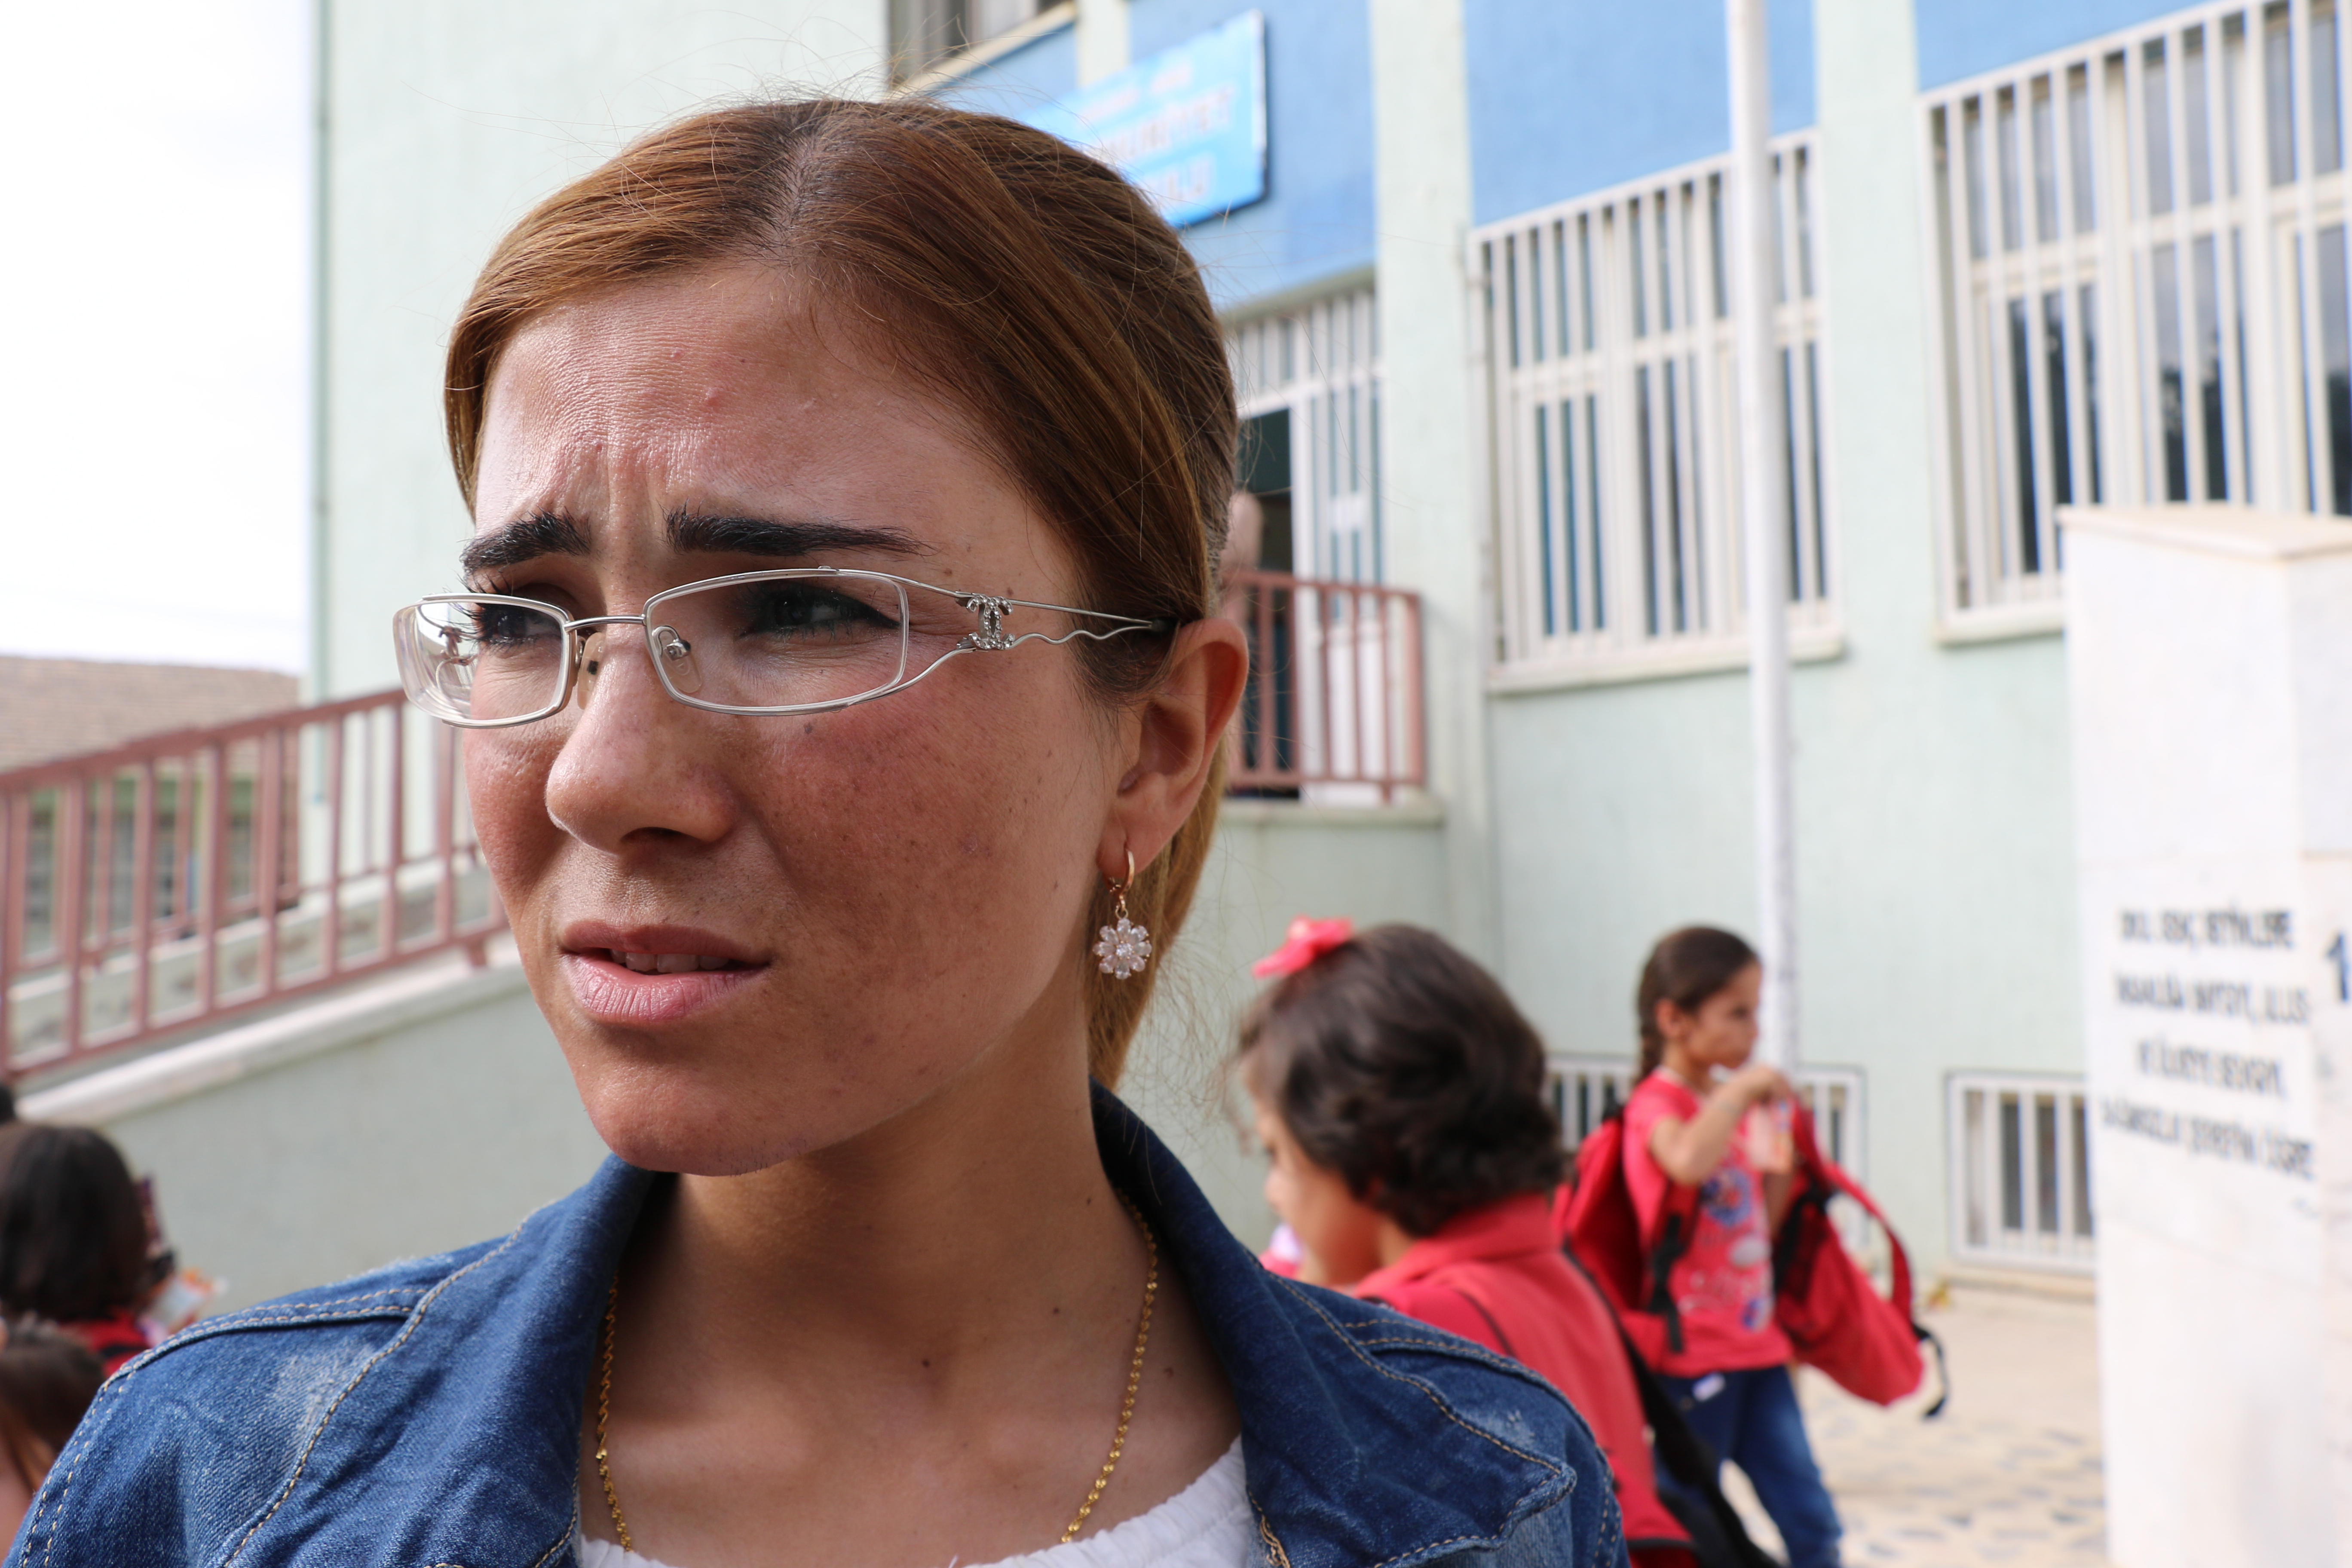 Farah*, a Syrian teacher living in displacement in Türkiye and receiving classroom support from Concern. “If the situation remains the same, and kids don’t go to school, we are going to have a very bad future with a lost generation,” she says